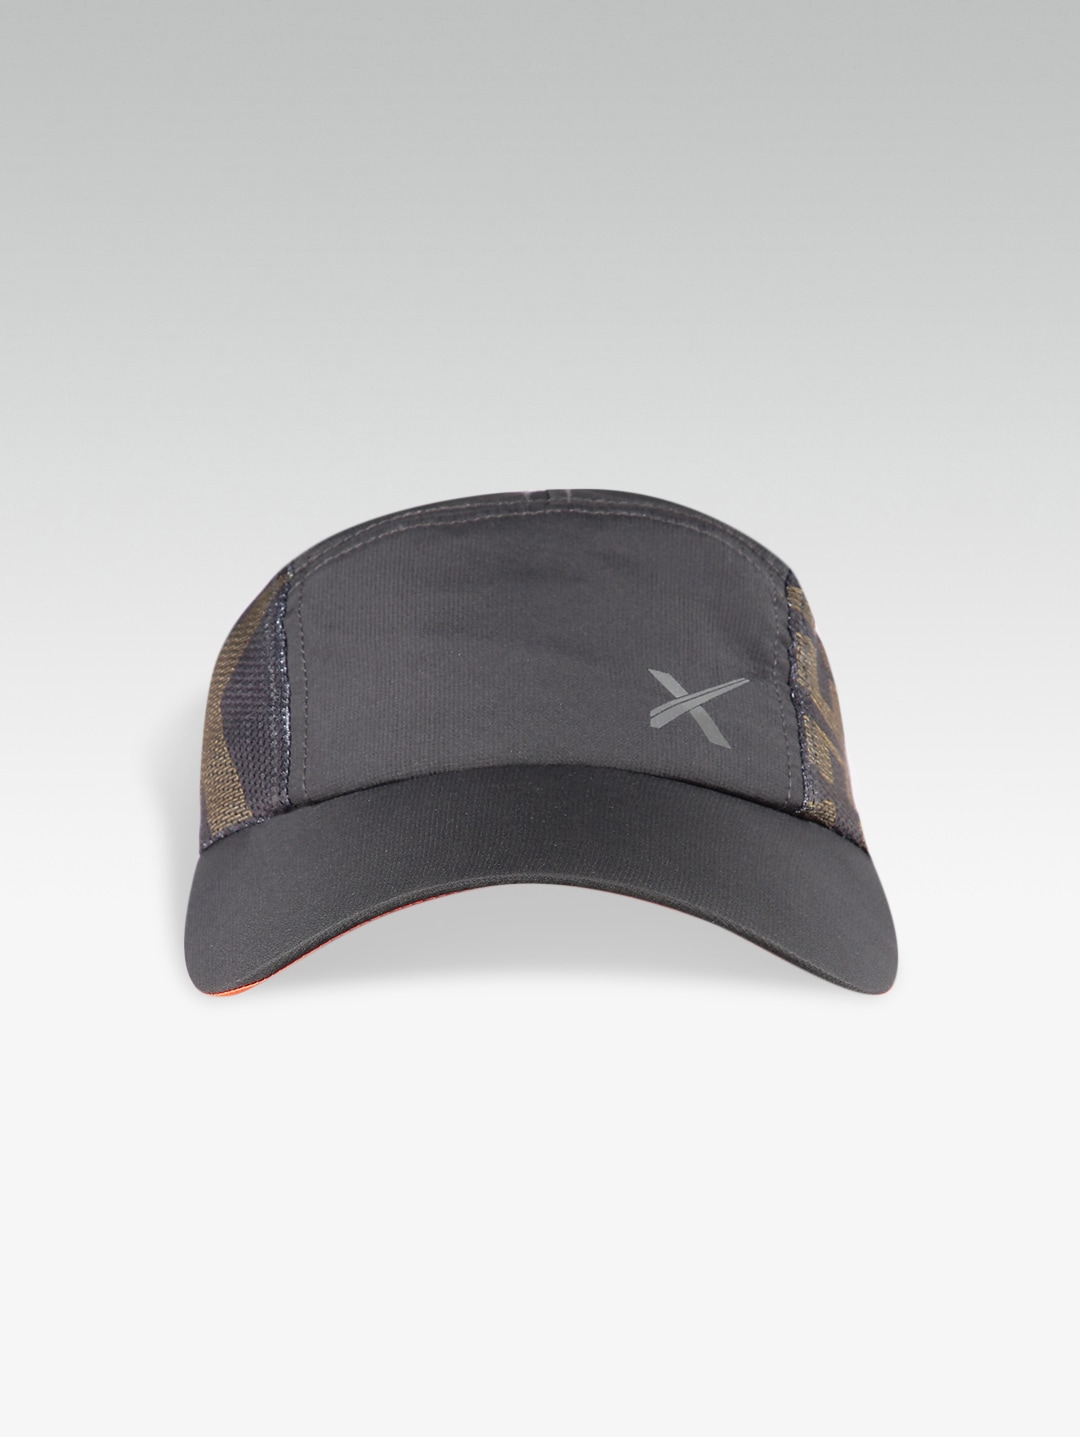 HRX by Hrithik Roshan Cap Starts from Rs. 299